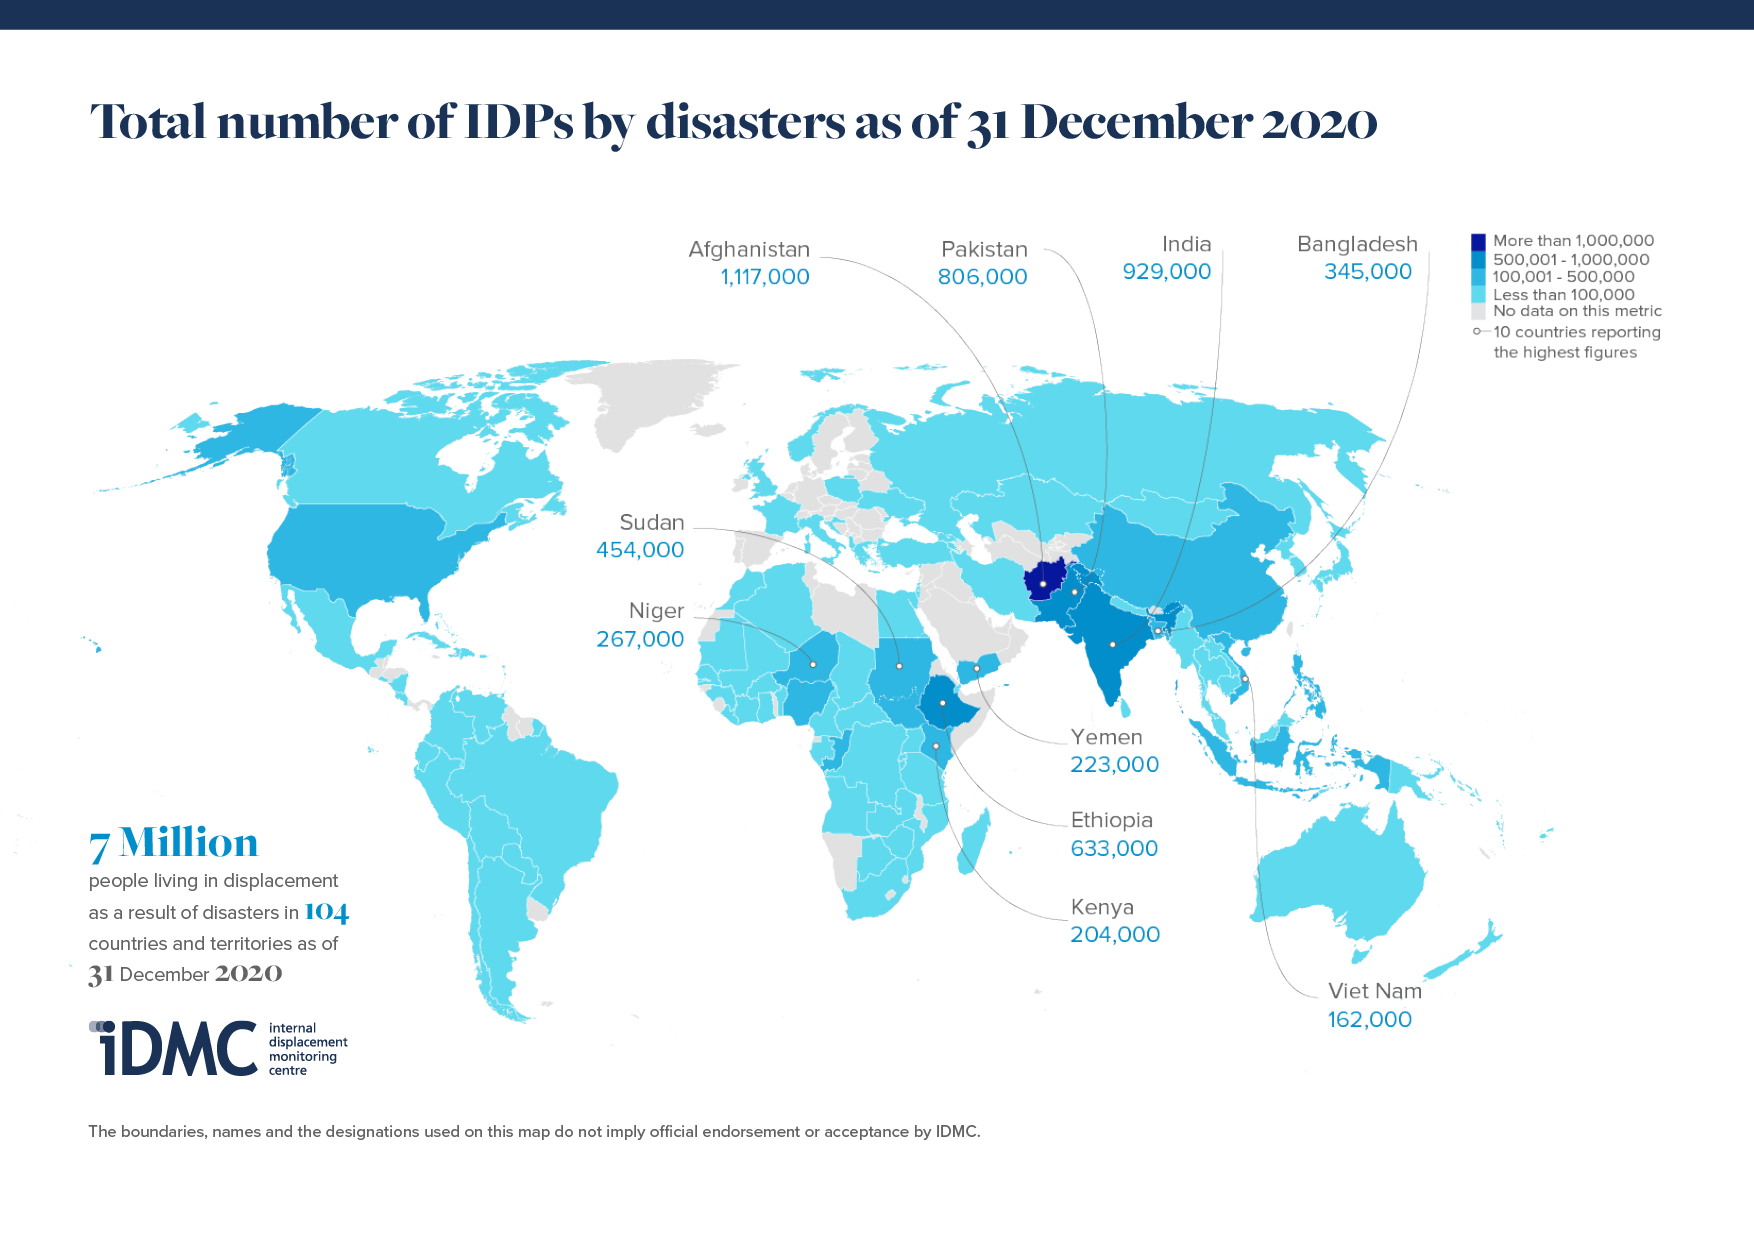 IDMC GRID2021 Total Number of IDPs by Disasters as of 31 Decemeber 2020